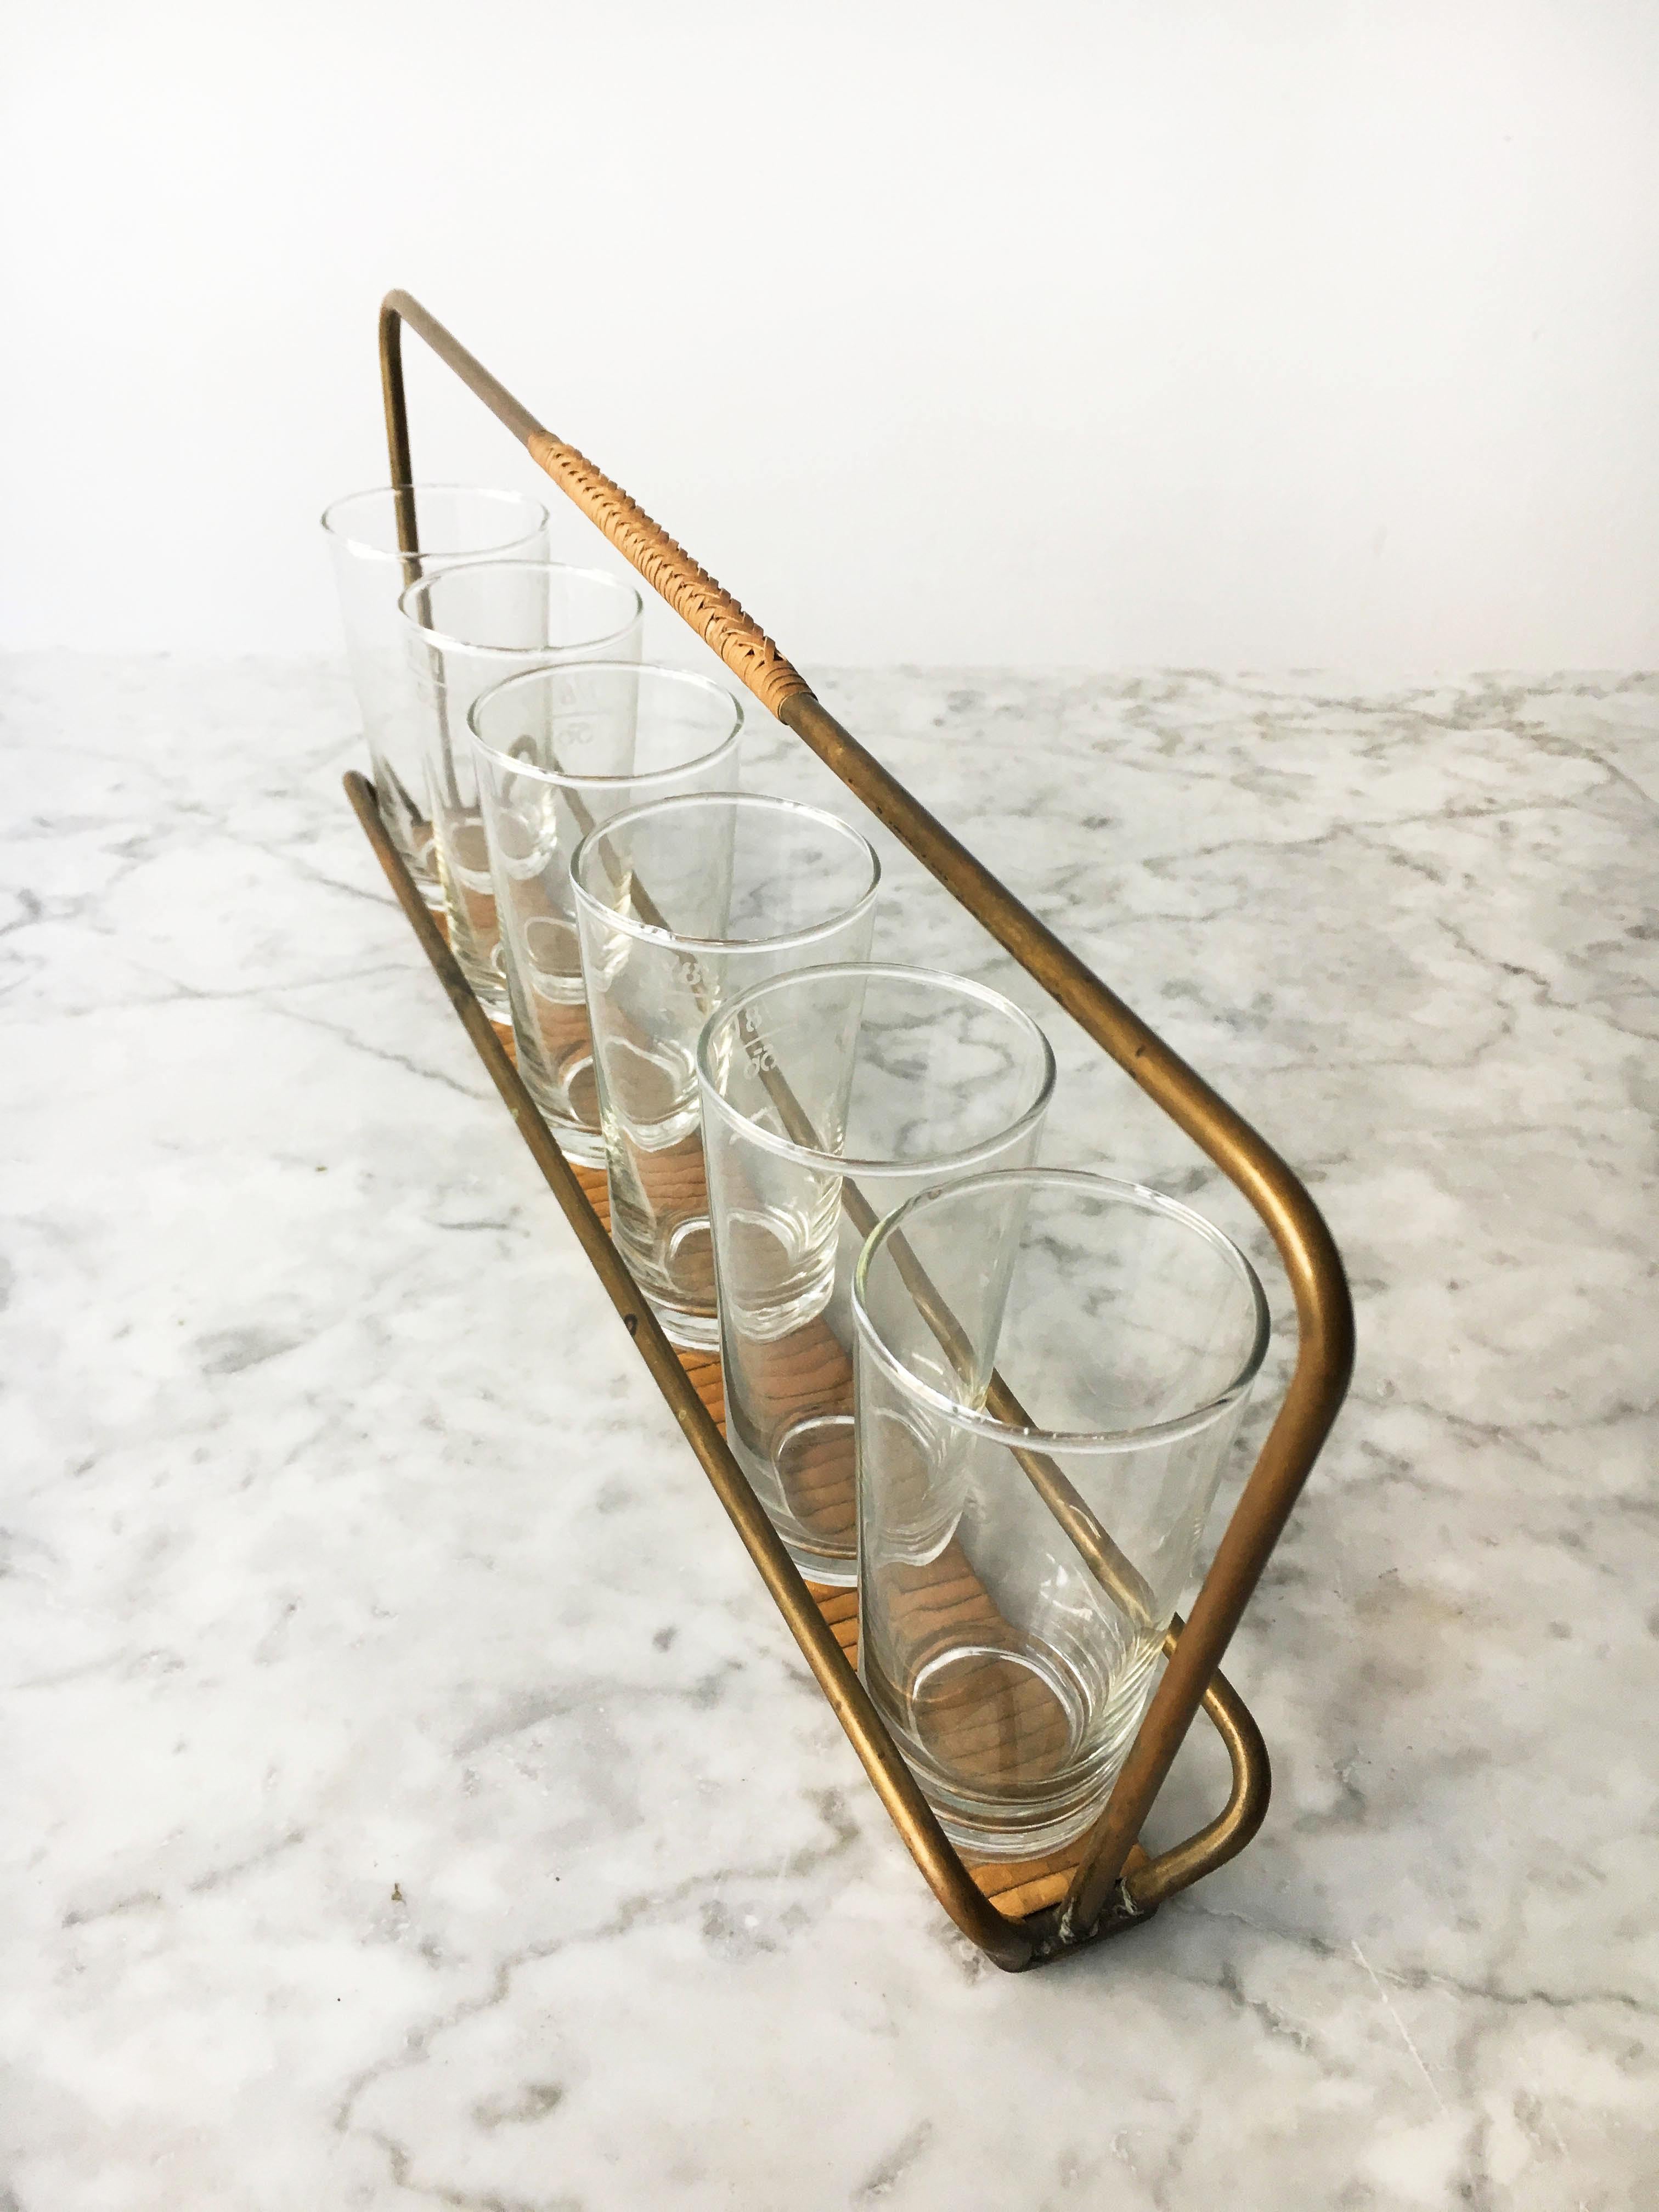 Vintage brass drinks carrier and six drinking glasses by Carl Auböck II, Vienna, circa 1950. The carrier is cast in solid brass wrapped in cane. In excellent condition with just the right amount of lovely gently aged patina.
       